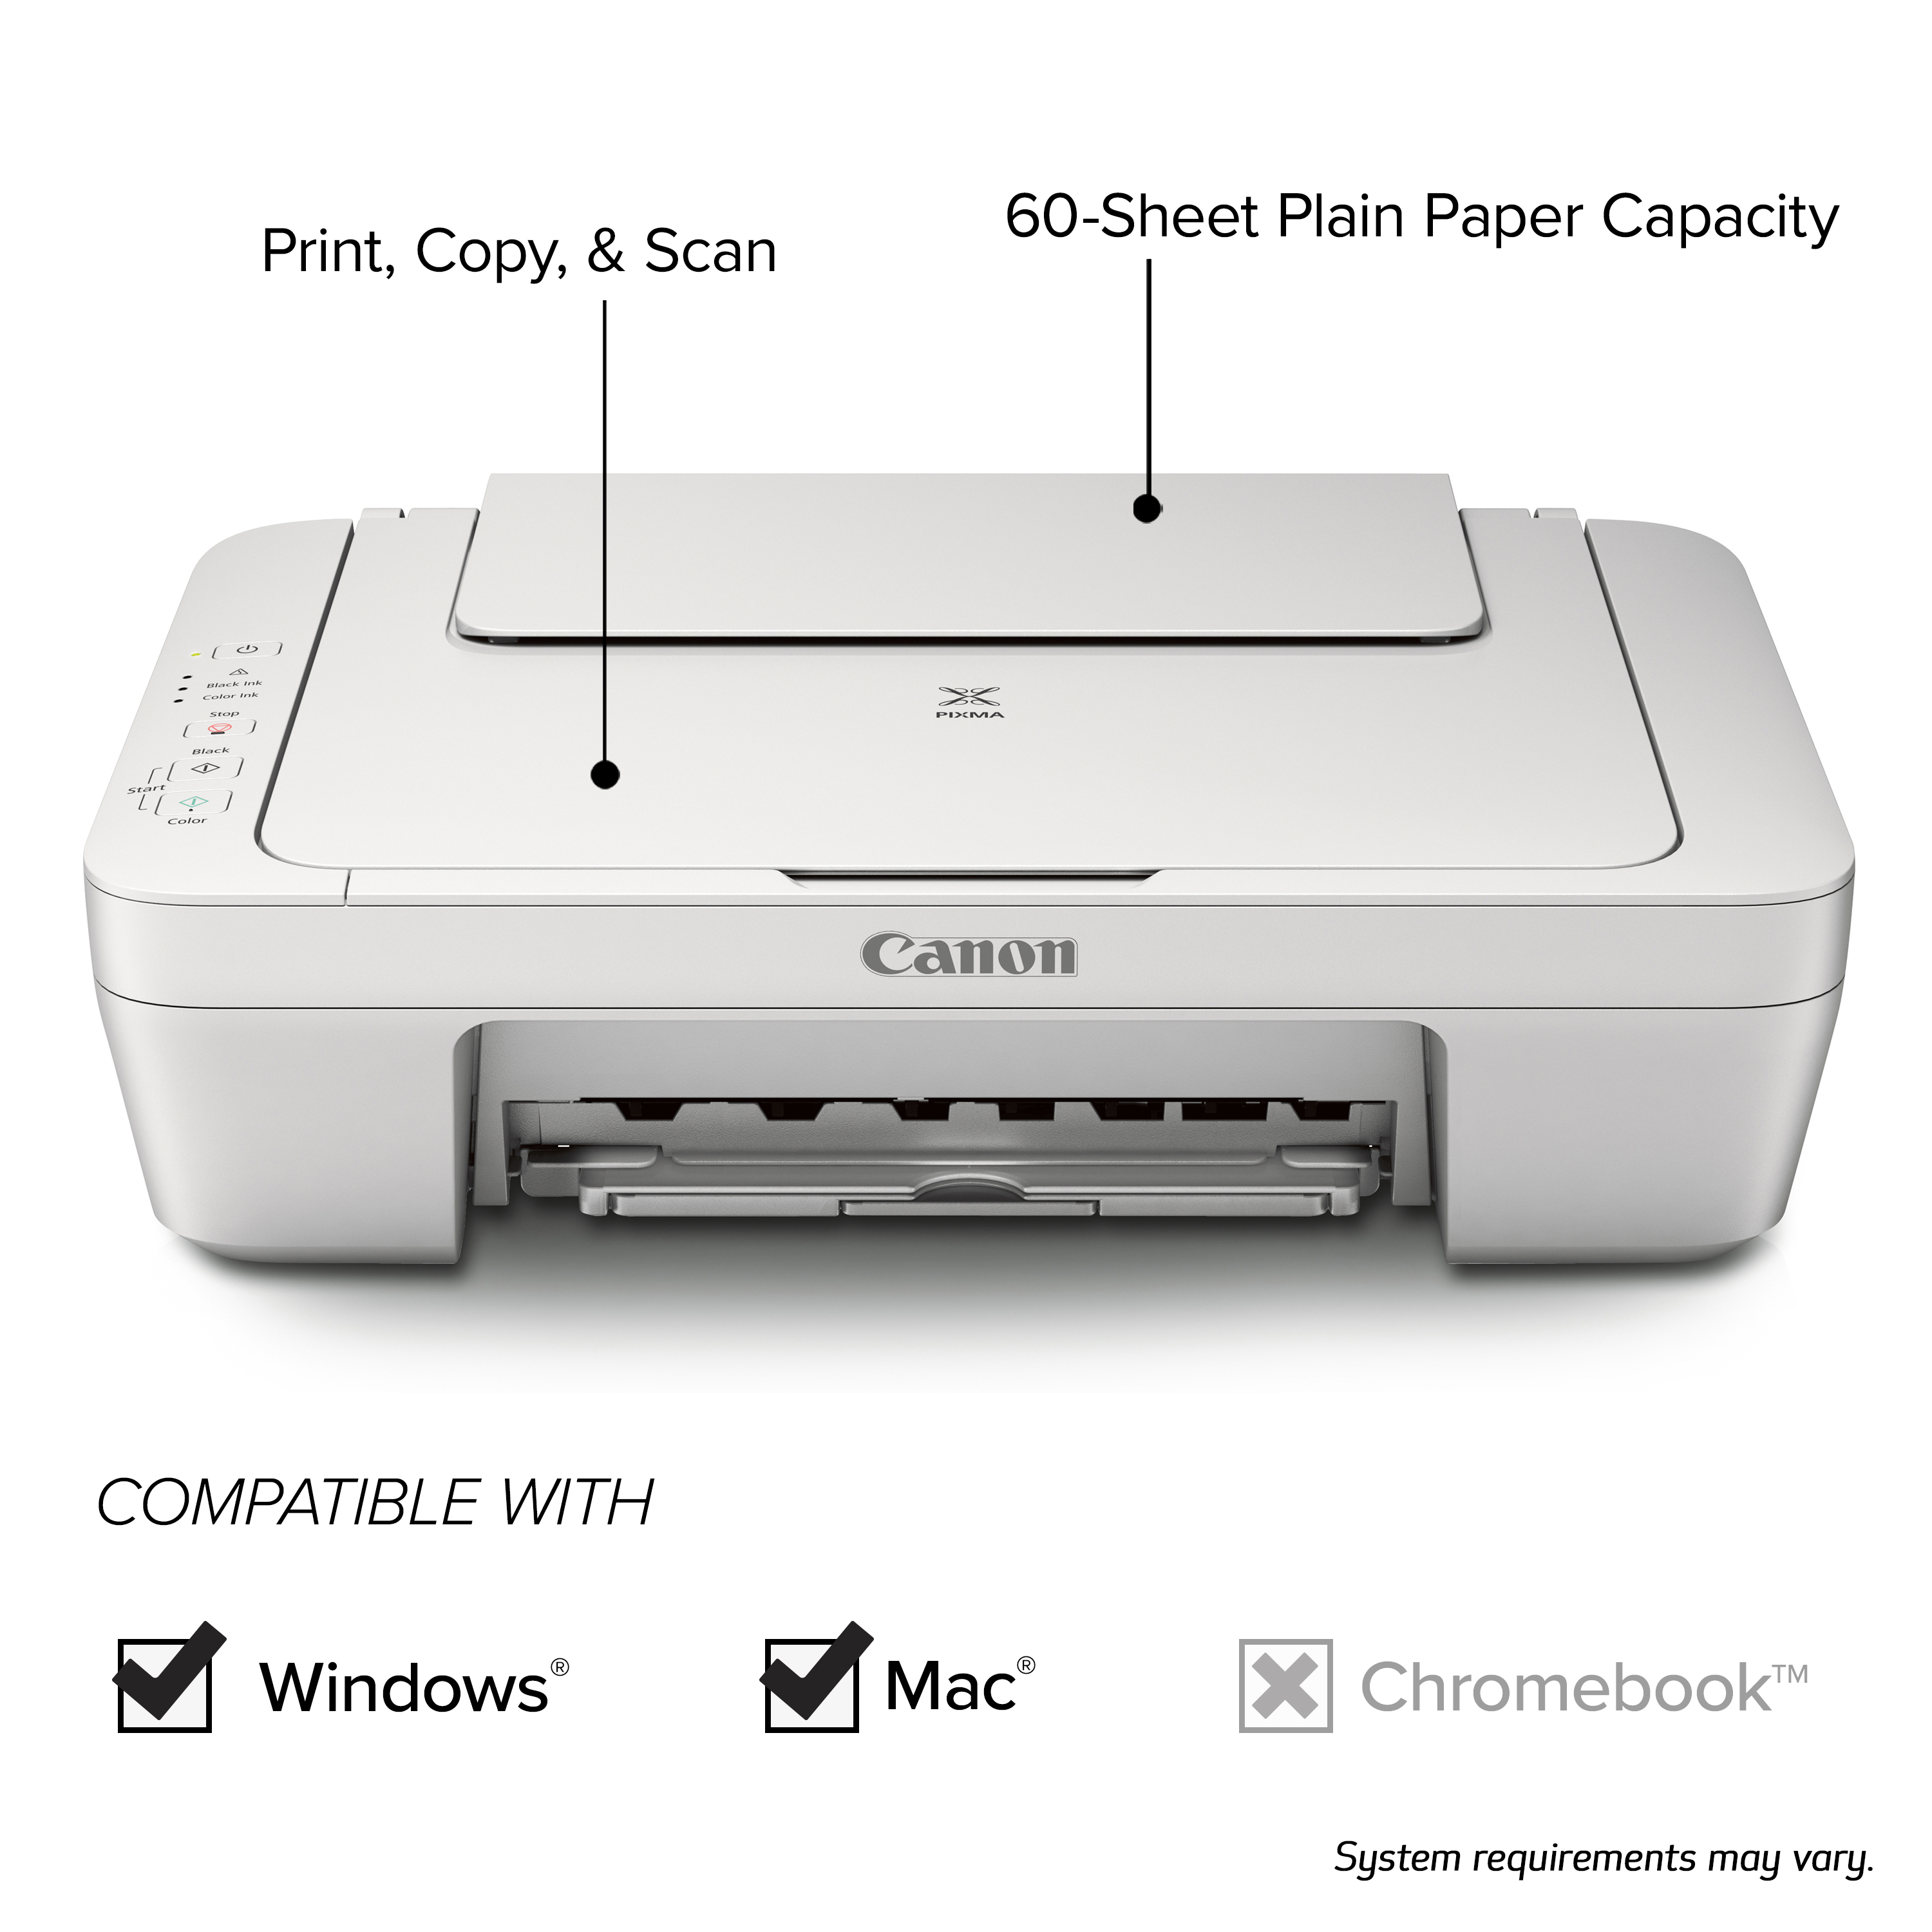 Canon PIXMA MG2522 Wired All-in-One Color Inkjet Printer [USB Cable Included], White - image 2 of 6